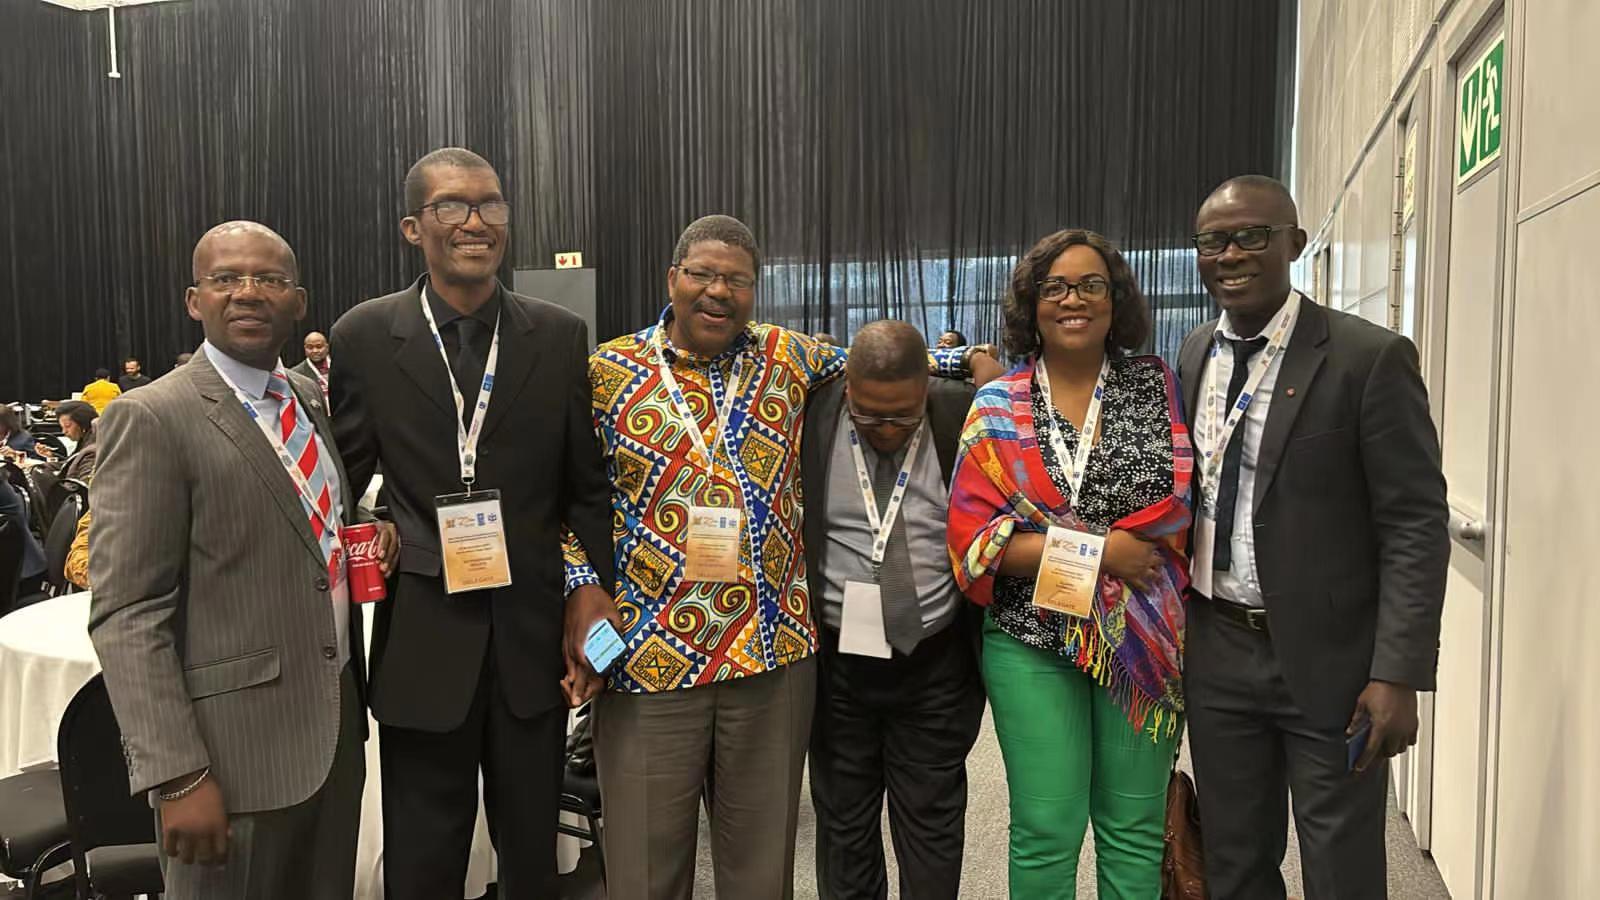 Integelec and African Election Strategic Alliance Partner Dr. John Collaborate to Launch a New Chapter in Electronic Voting